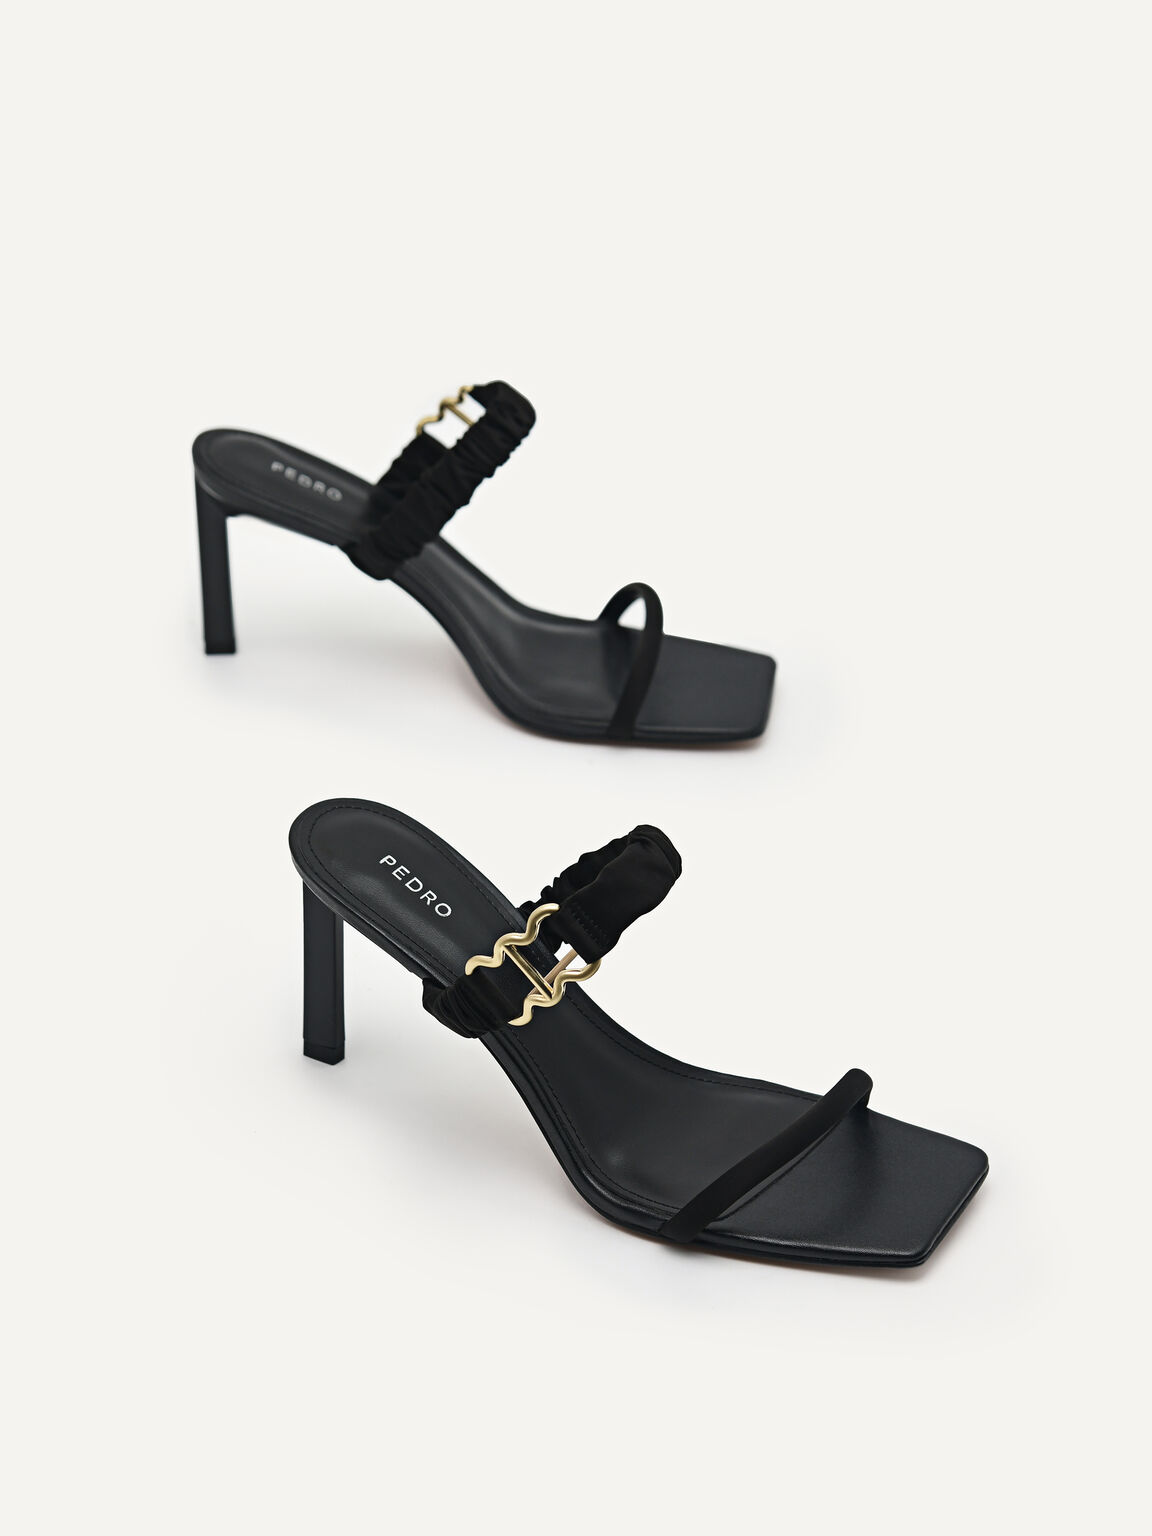 Double Strap Heeled Sandals, Black